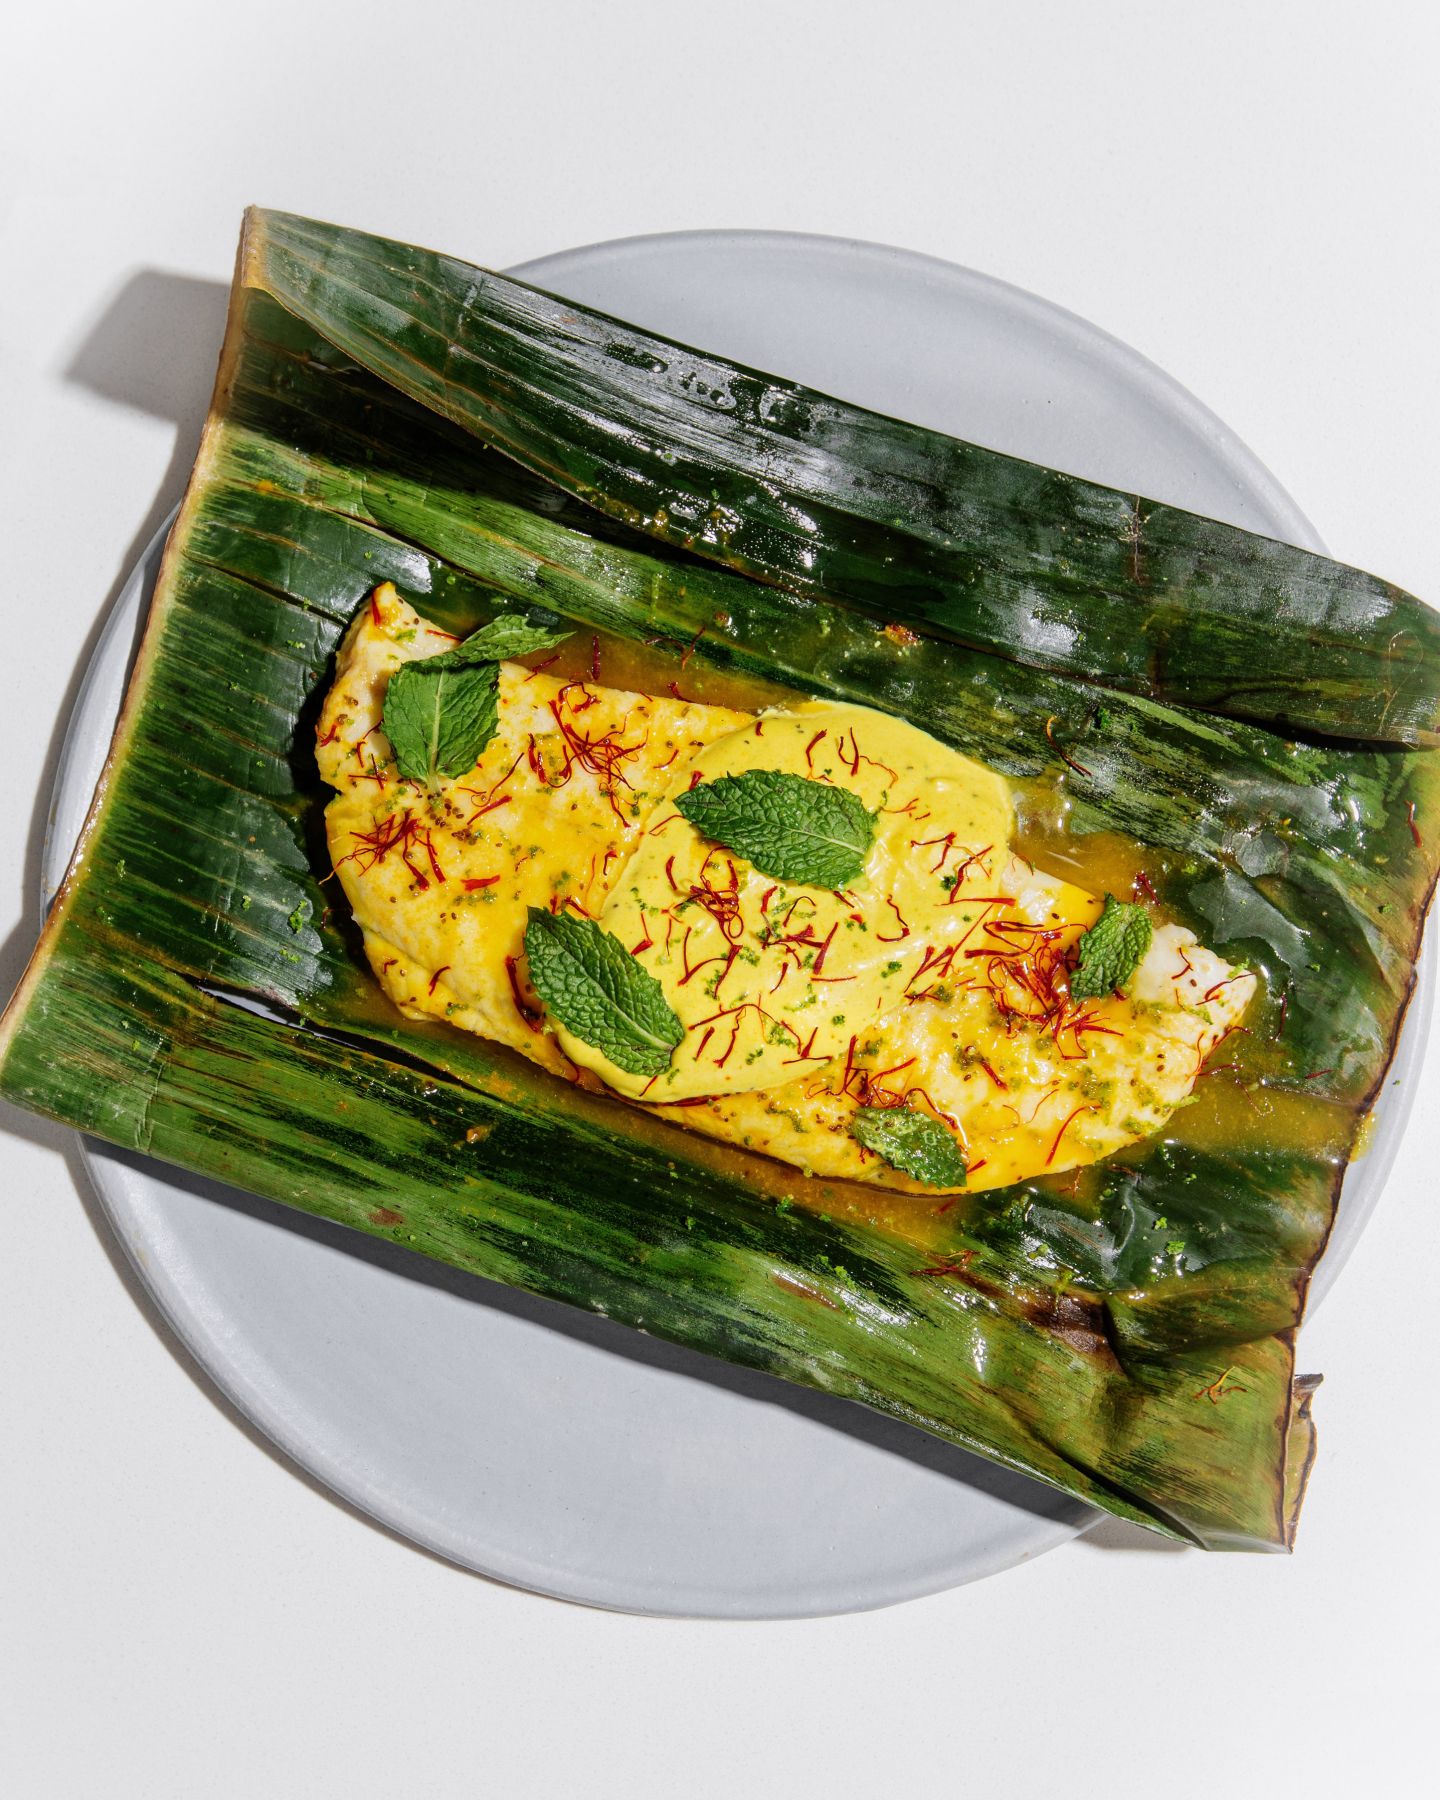 Tropical Spiced Fish in Banana Leaves